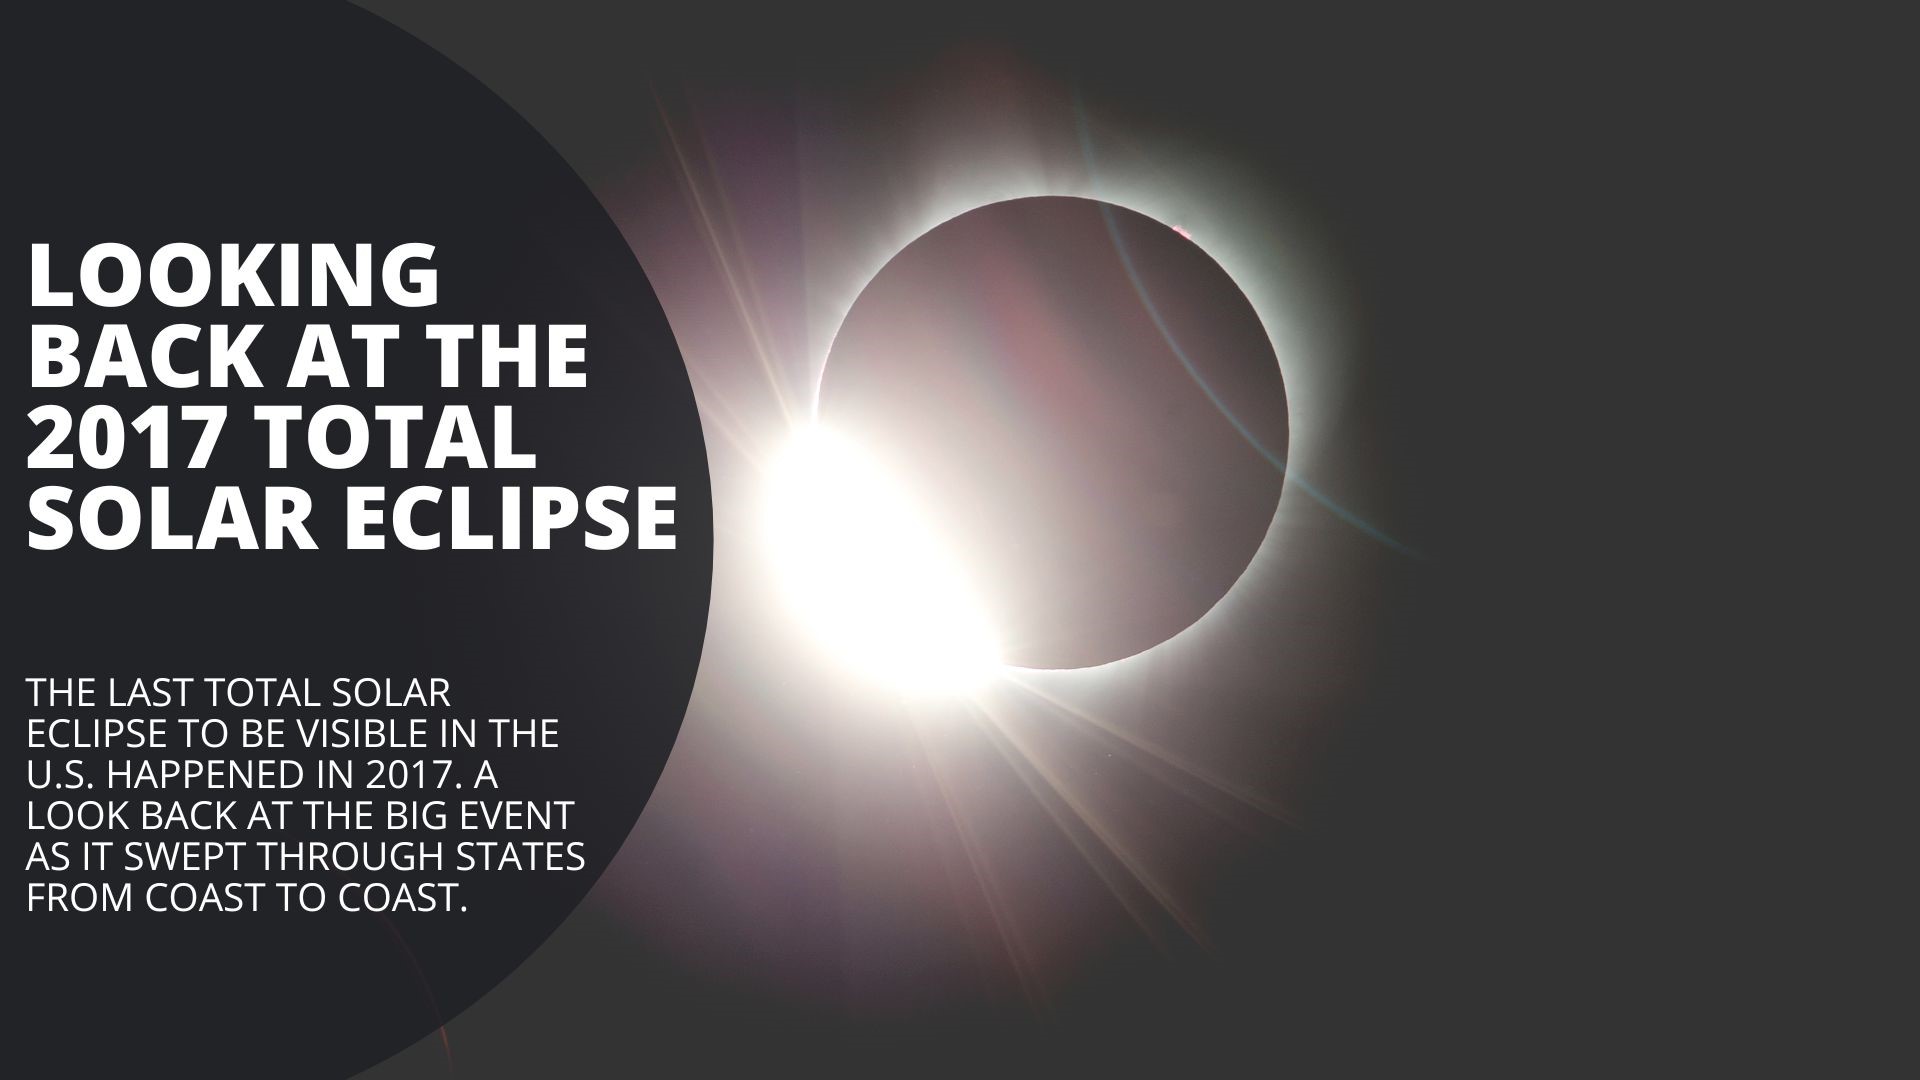 Total solar eclipse 6 years ago, next total eclipse in 2024